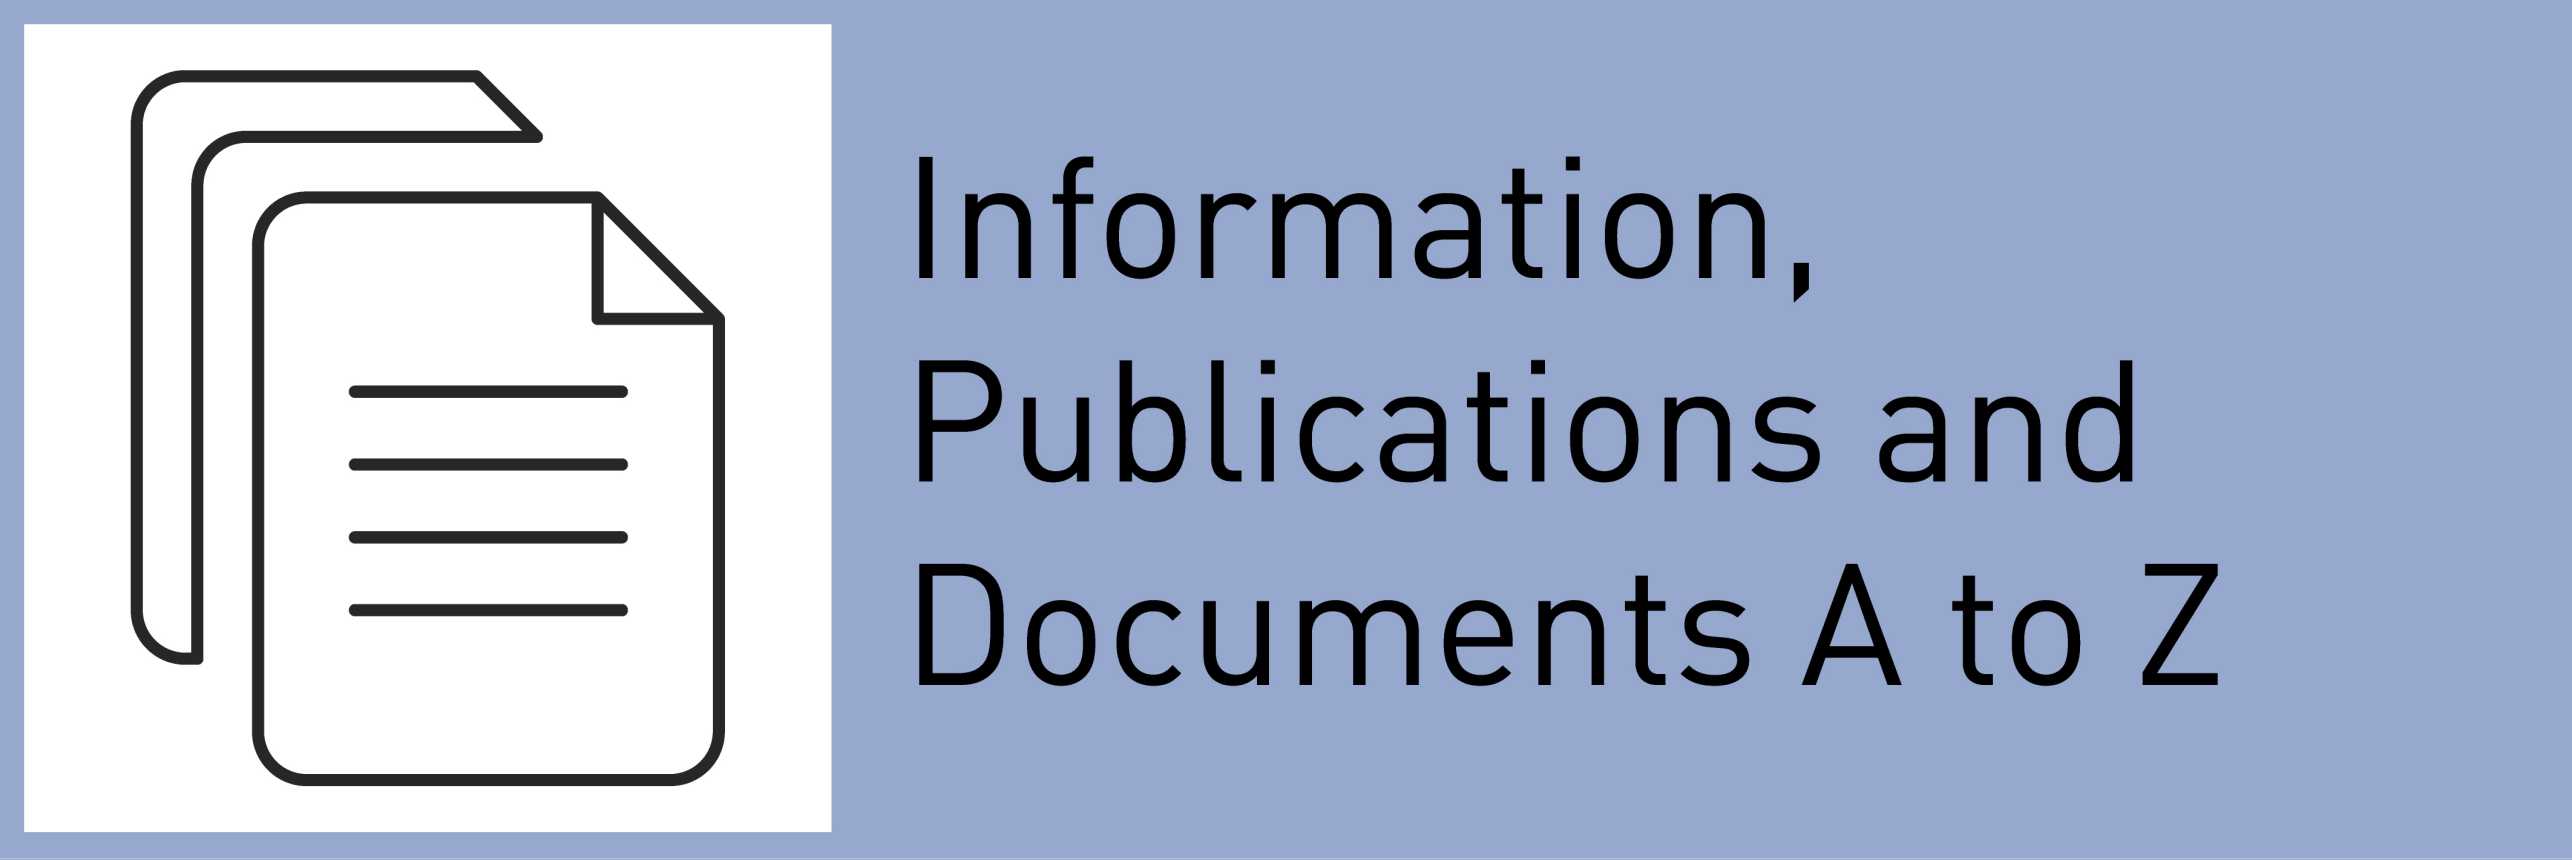 Subpage Information and Publications